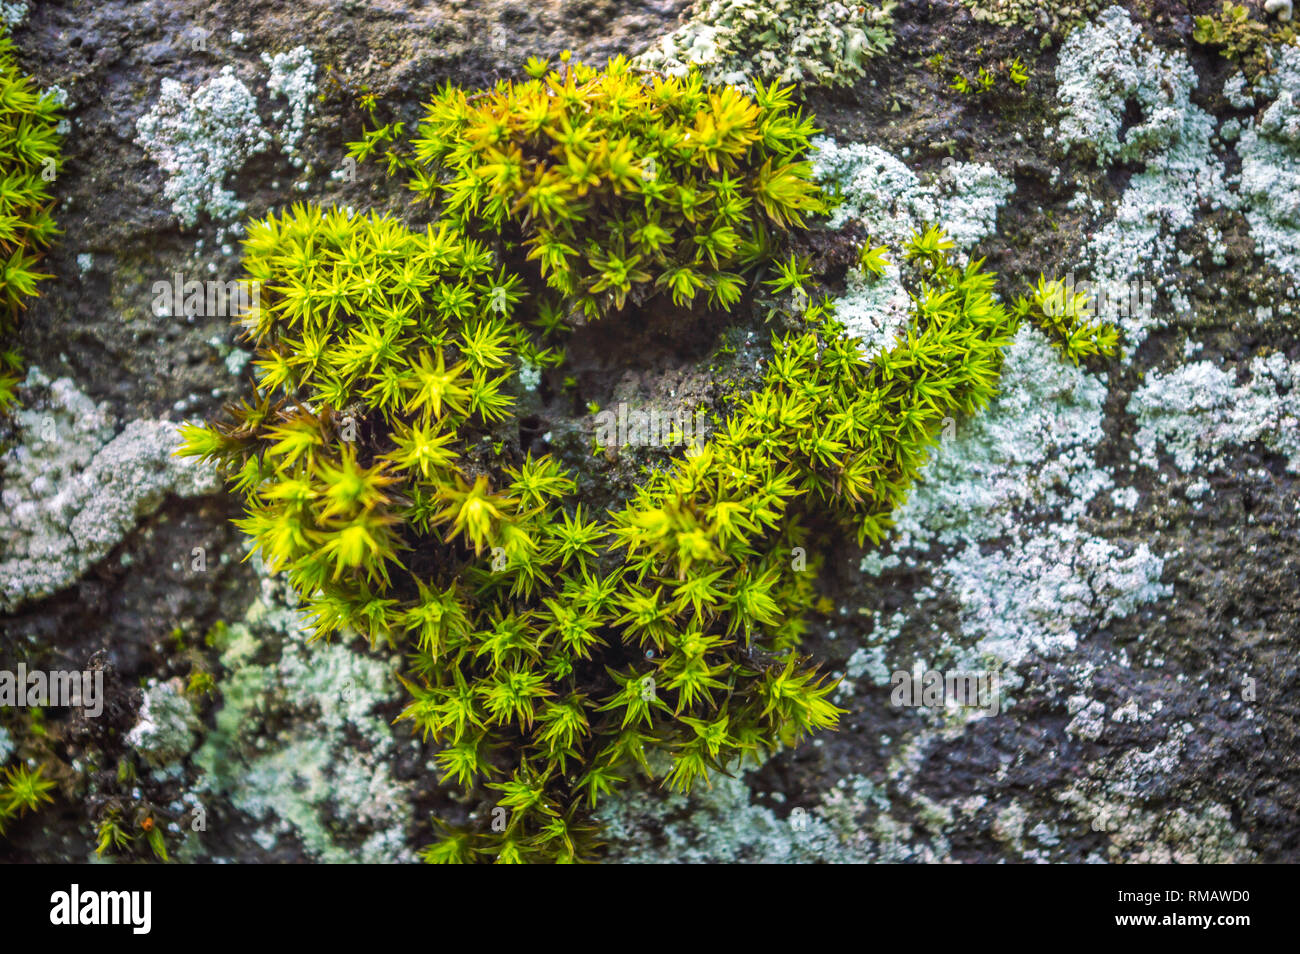 Dark green coloured moss growing on limestone rocks. Lichens growing on a rough rocky surface Stock Photo